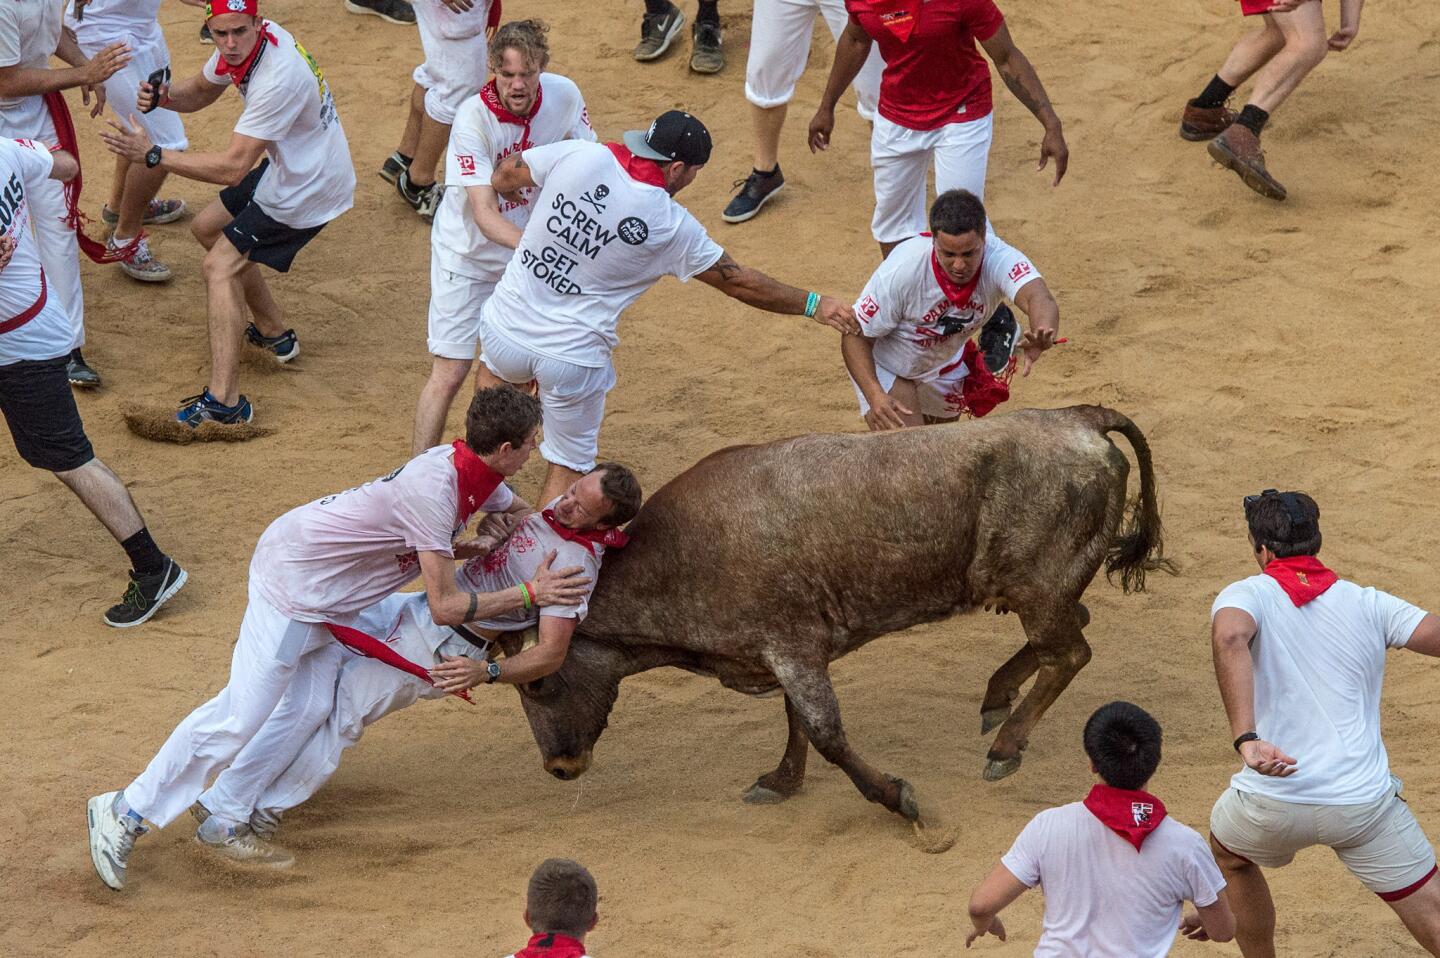 Revelers try to avoid a fighting cow inside Pamplona's bullring during the second day of the San Fermin Running of the Bulls festival in Pamplona, Spain. The annual Fiesta de San Fermin, made famous by the 1926 Ernest Hemmingway novel "The Sun Also Rises," involves the daily running of the bulls through the historic heart of they city to the bullring.